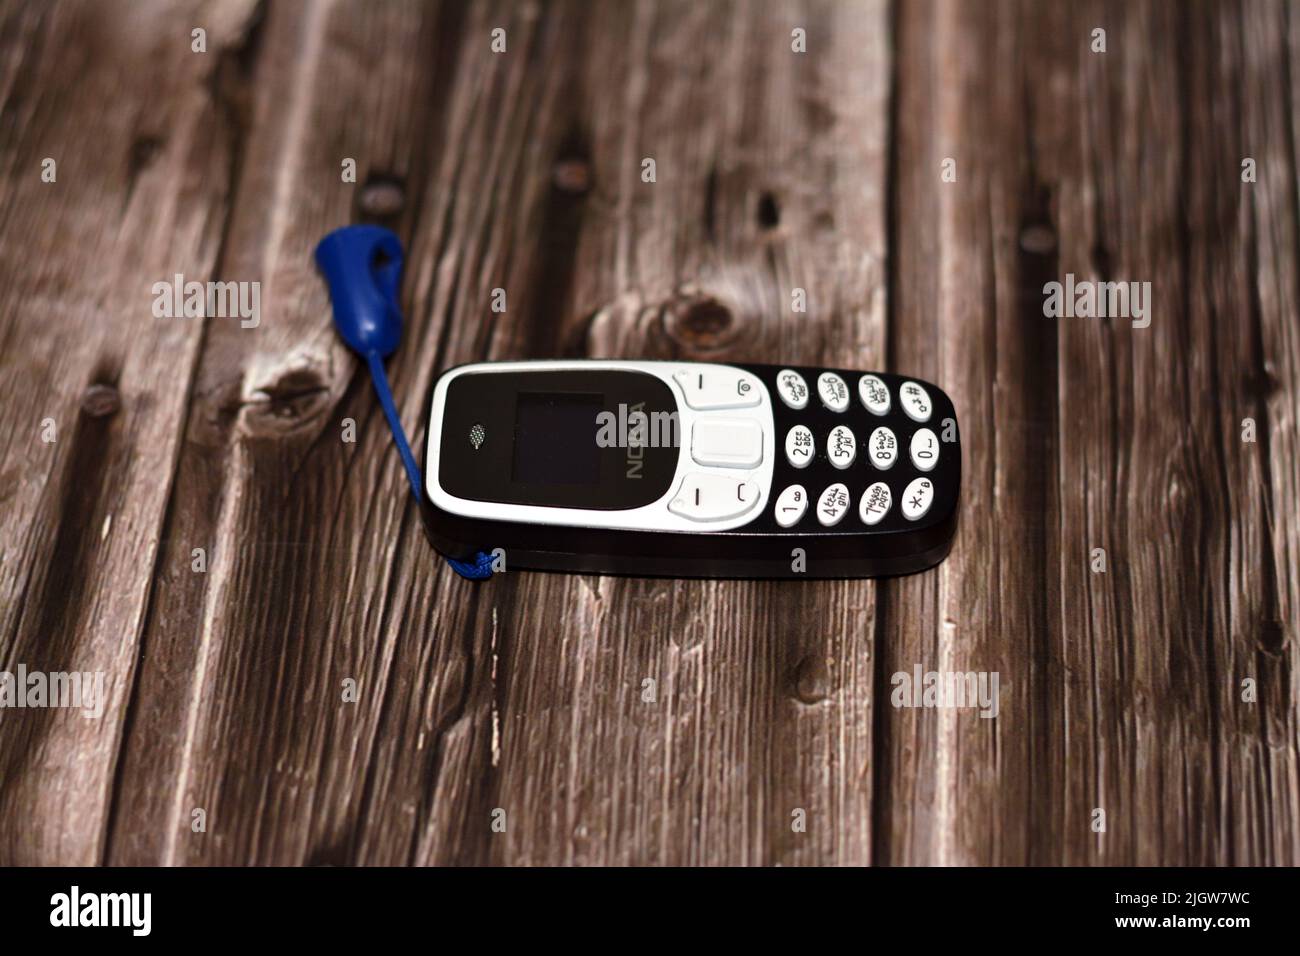 Cairo, Egypt, June 11 2022: A tiny small mini Nokia cell phone, an old classic smart small sized phone with a classic keypad and regular screen isolat Stock Photo